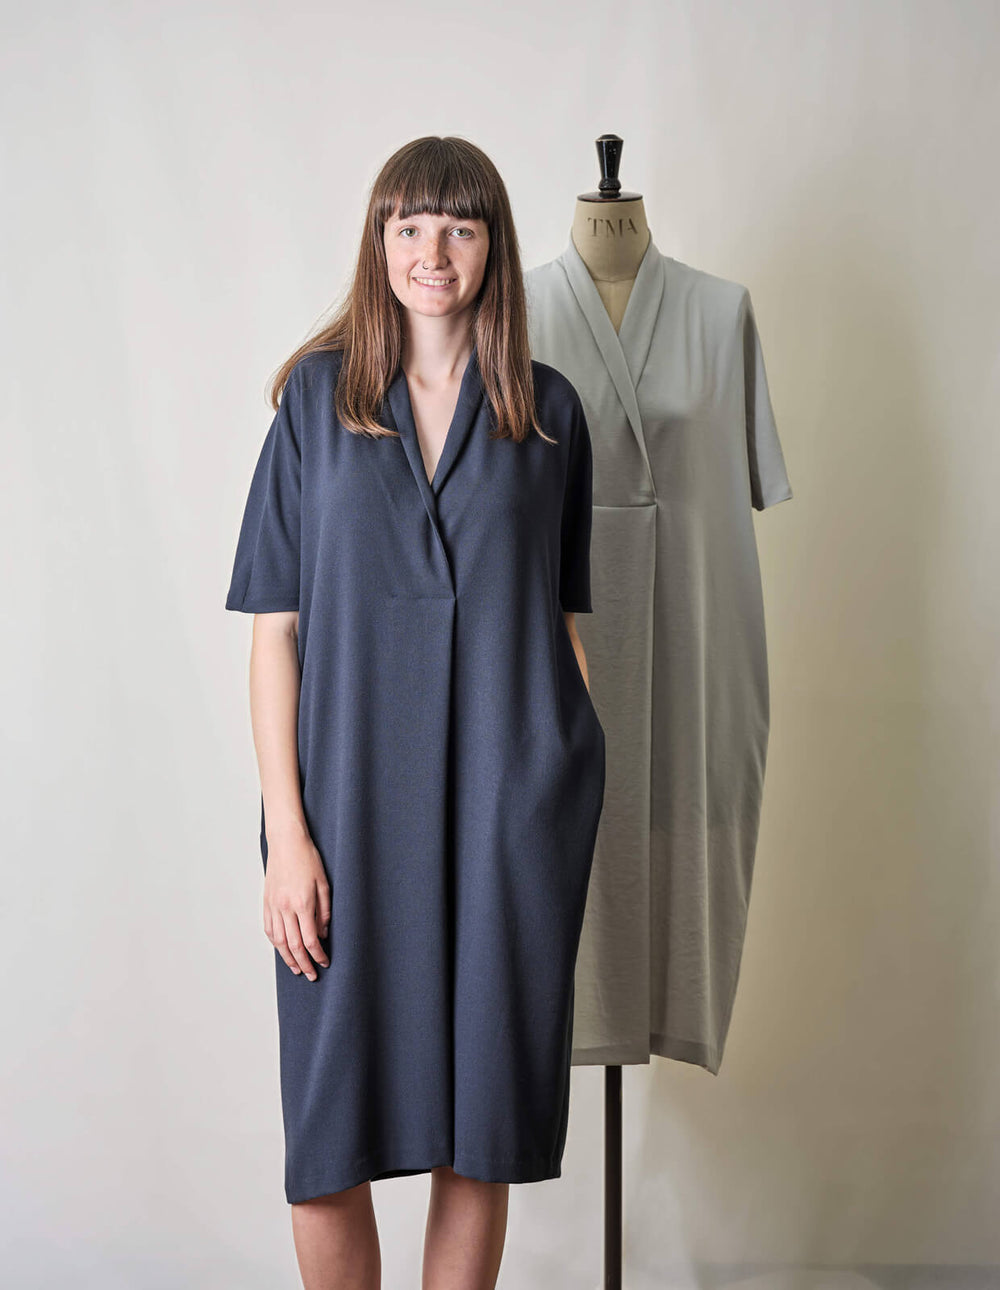 Woman wearing the Shawl Collar Dress sewing pattern from The Maker's Atelier on The Fold Line. A dress pattern made in wool, linen, cotton or viscose fabrics, featuring a relaxed fit, shawl collar, V-neck, folded pleat front detail, in-seam pockets, pull-